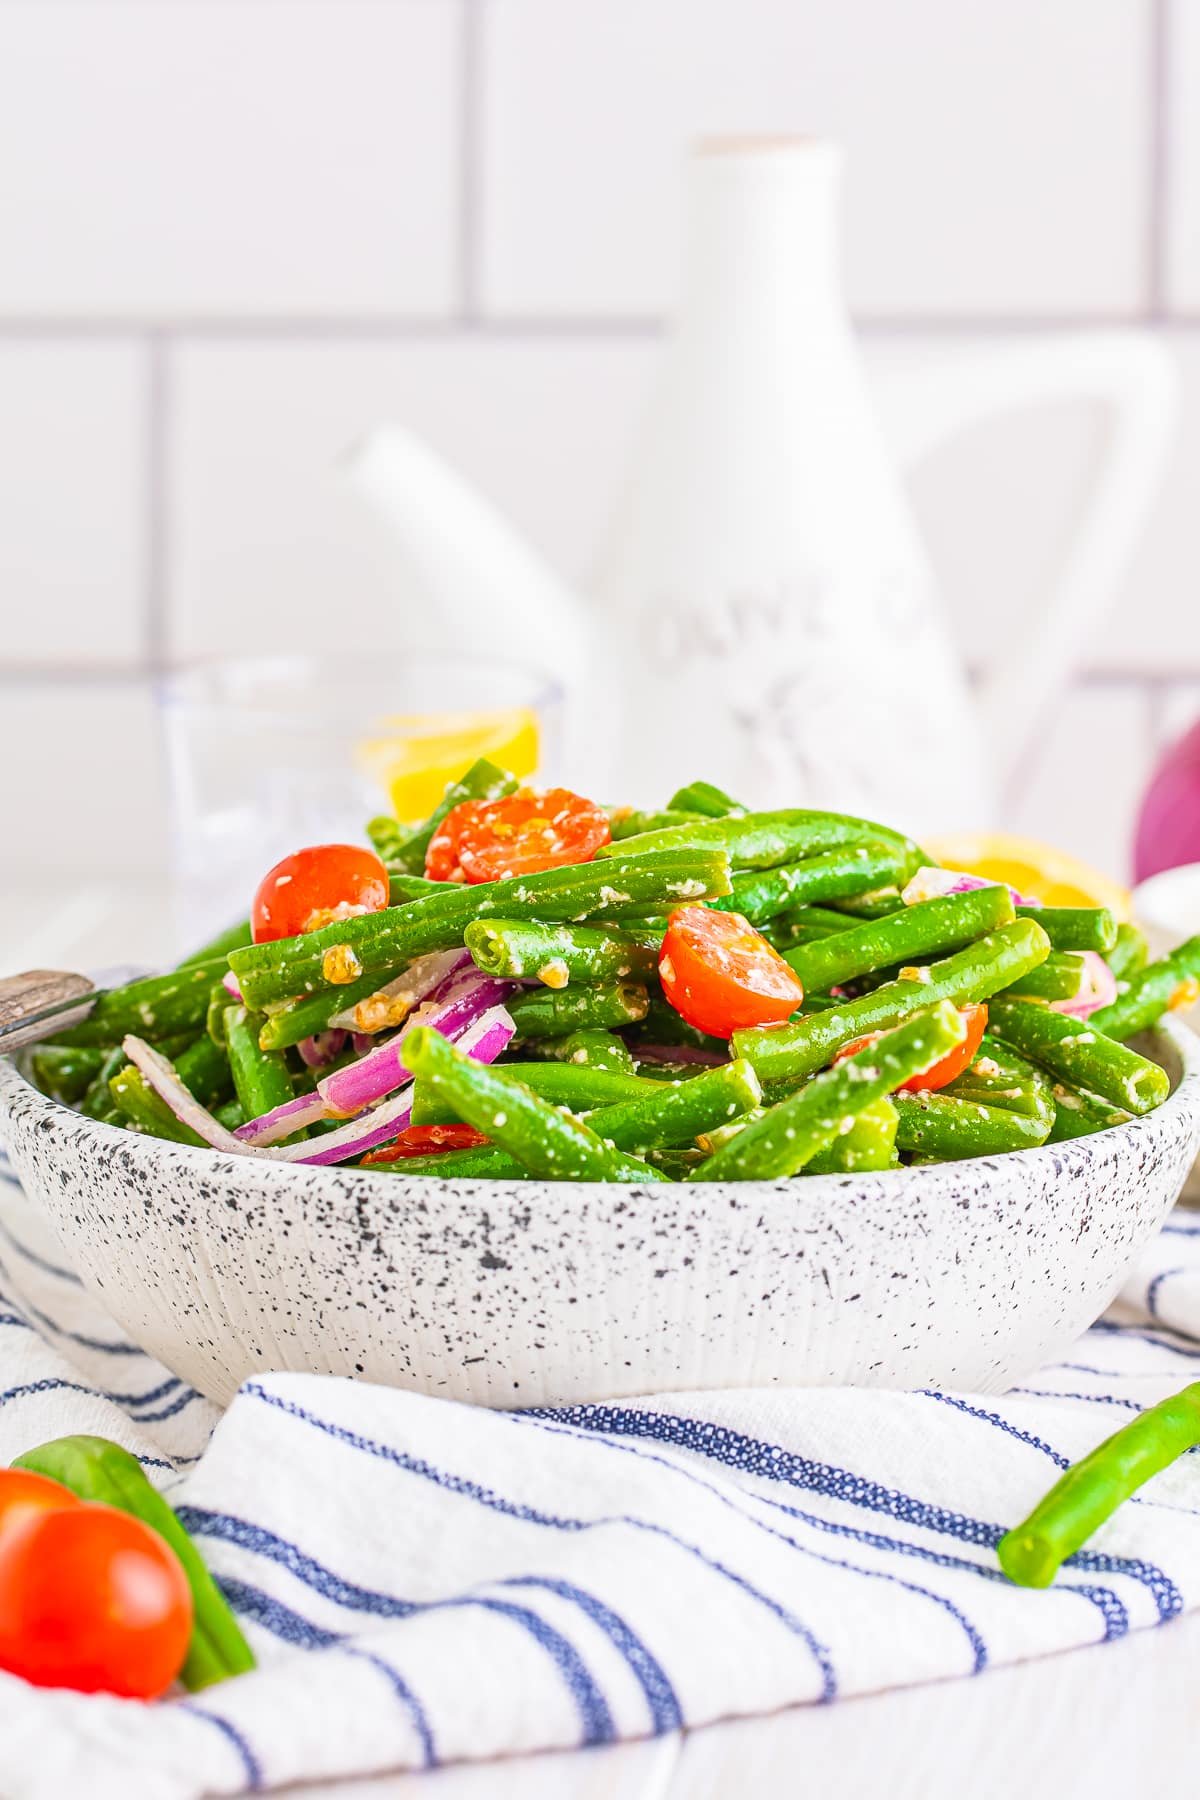 Far away image of cold green bean salad in a speckled bowl